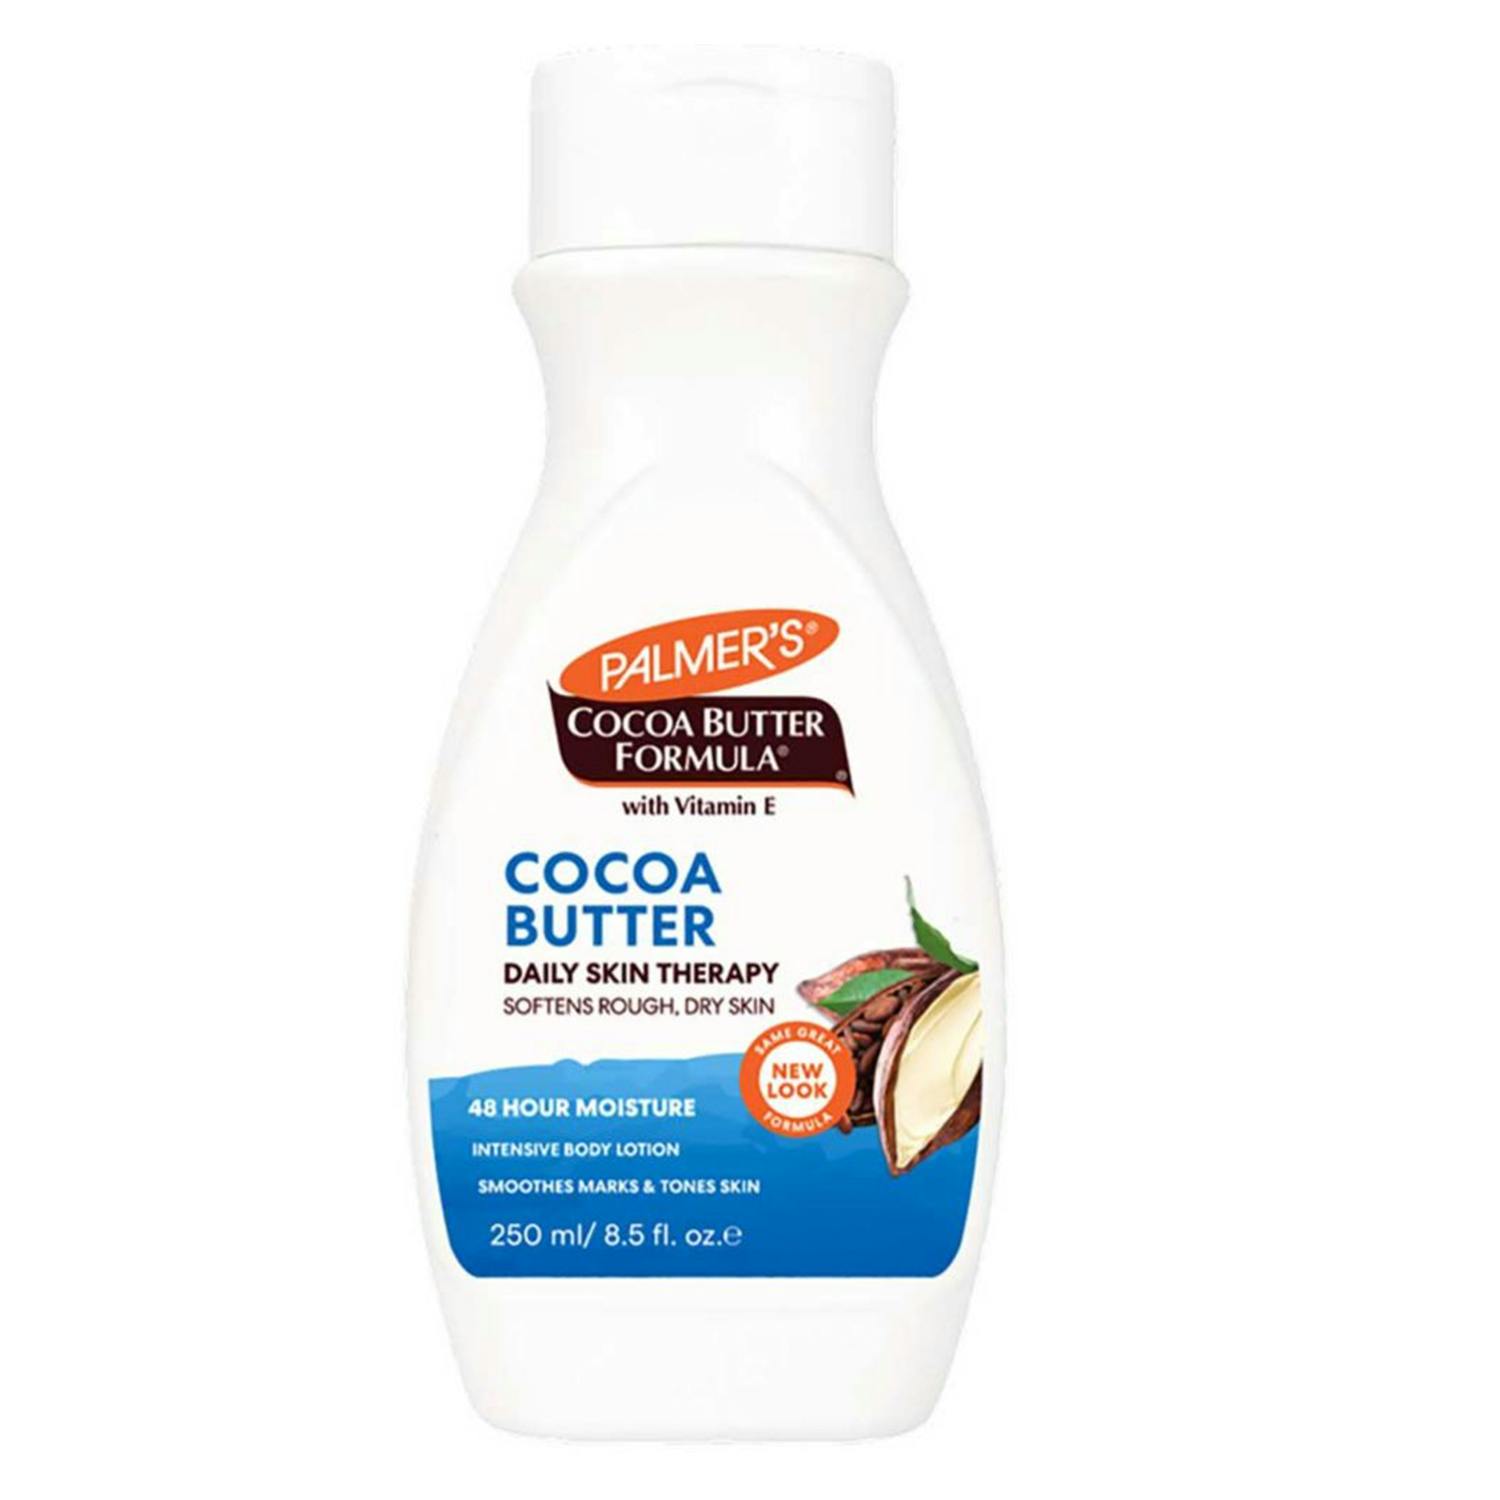 Cocoa Butter For Tattoos Safety Benefits And HowTo  Tattoo Removal  Cream Fading Tattoo Cream Tattoo Remover Balm Softens Skin Moisturizer  Relieve Repair For Hands Feet Back For Salon  tkgovba